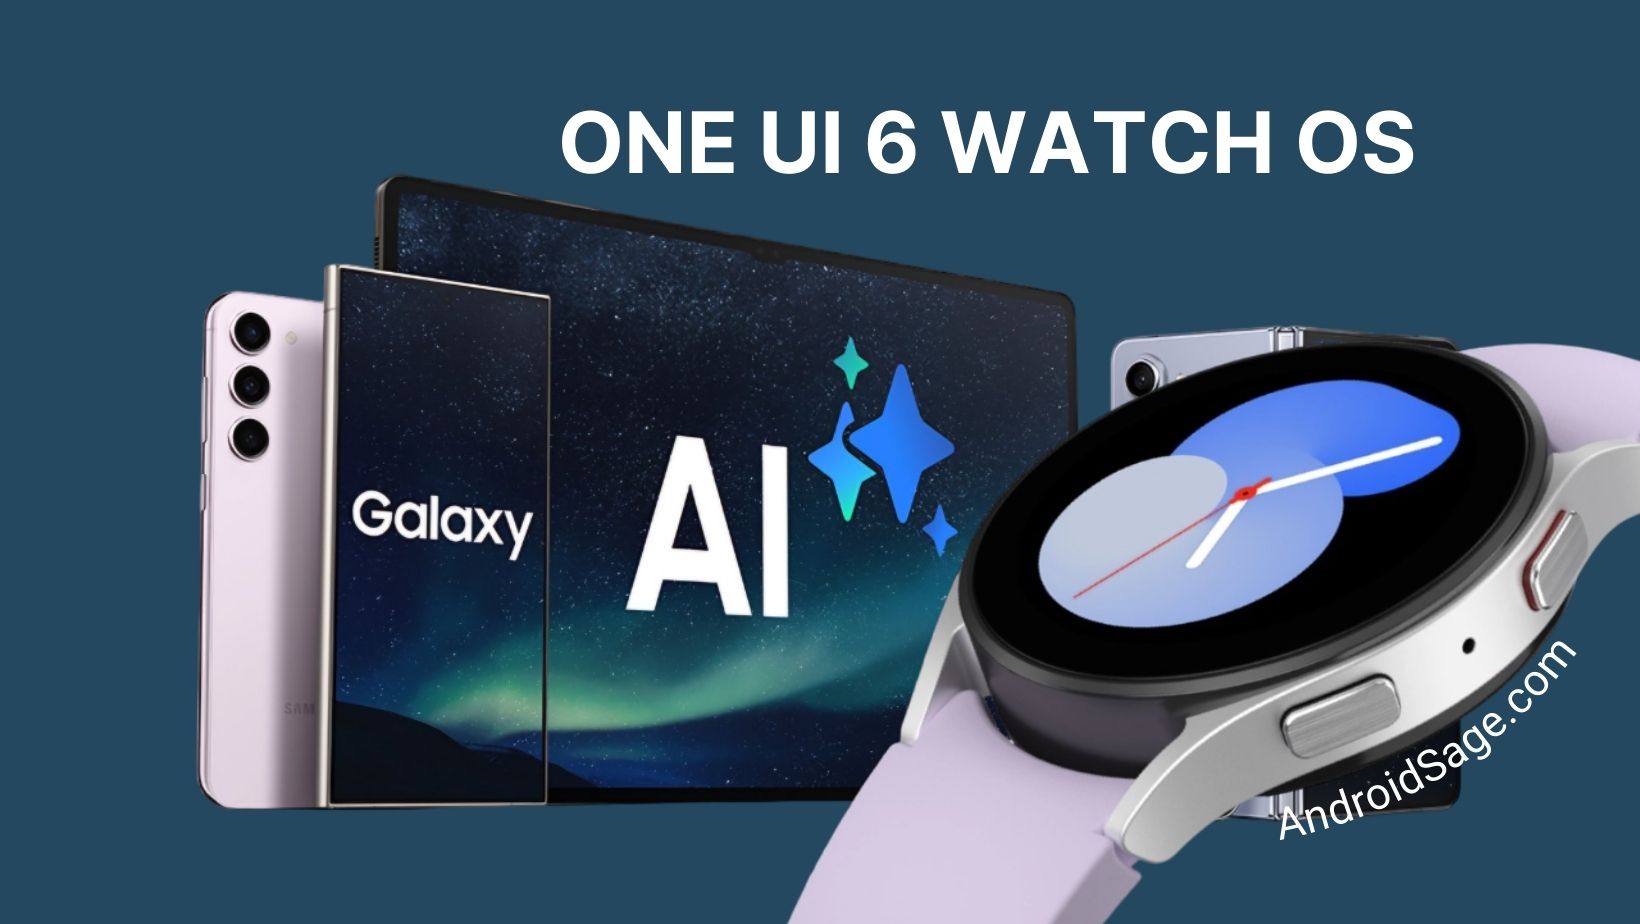 Samsung One UI 6 Watch OS for Galaxy Watch 4 5 and 6 with Galaxy AI Features